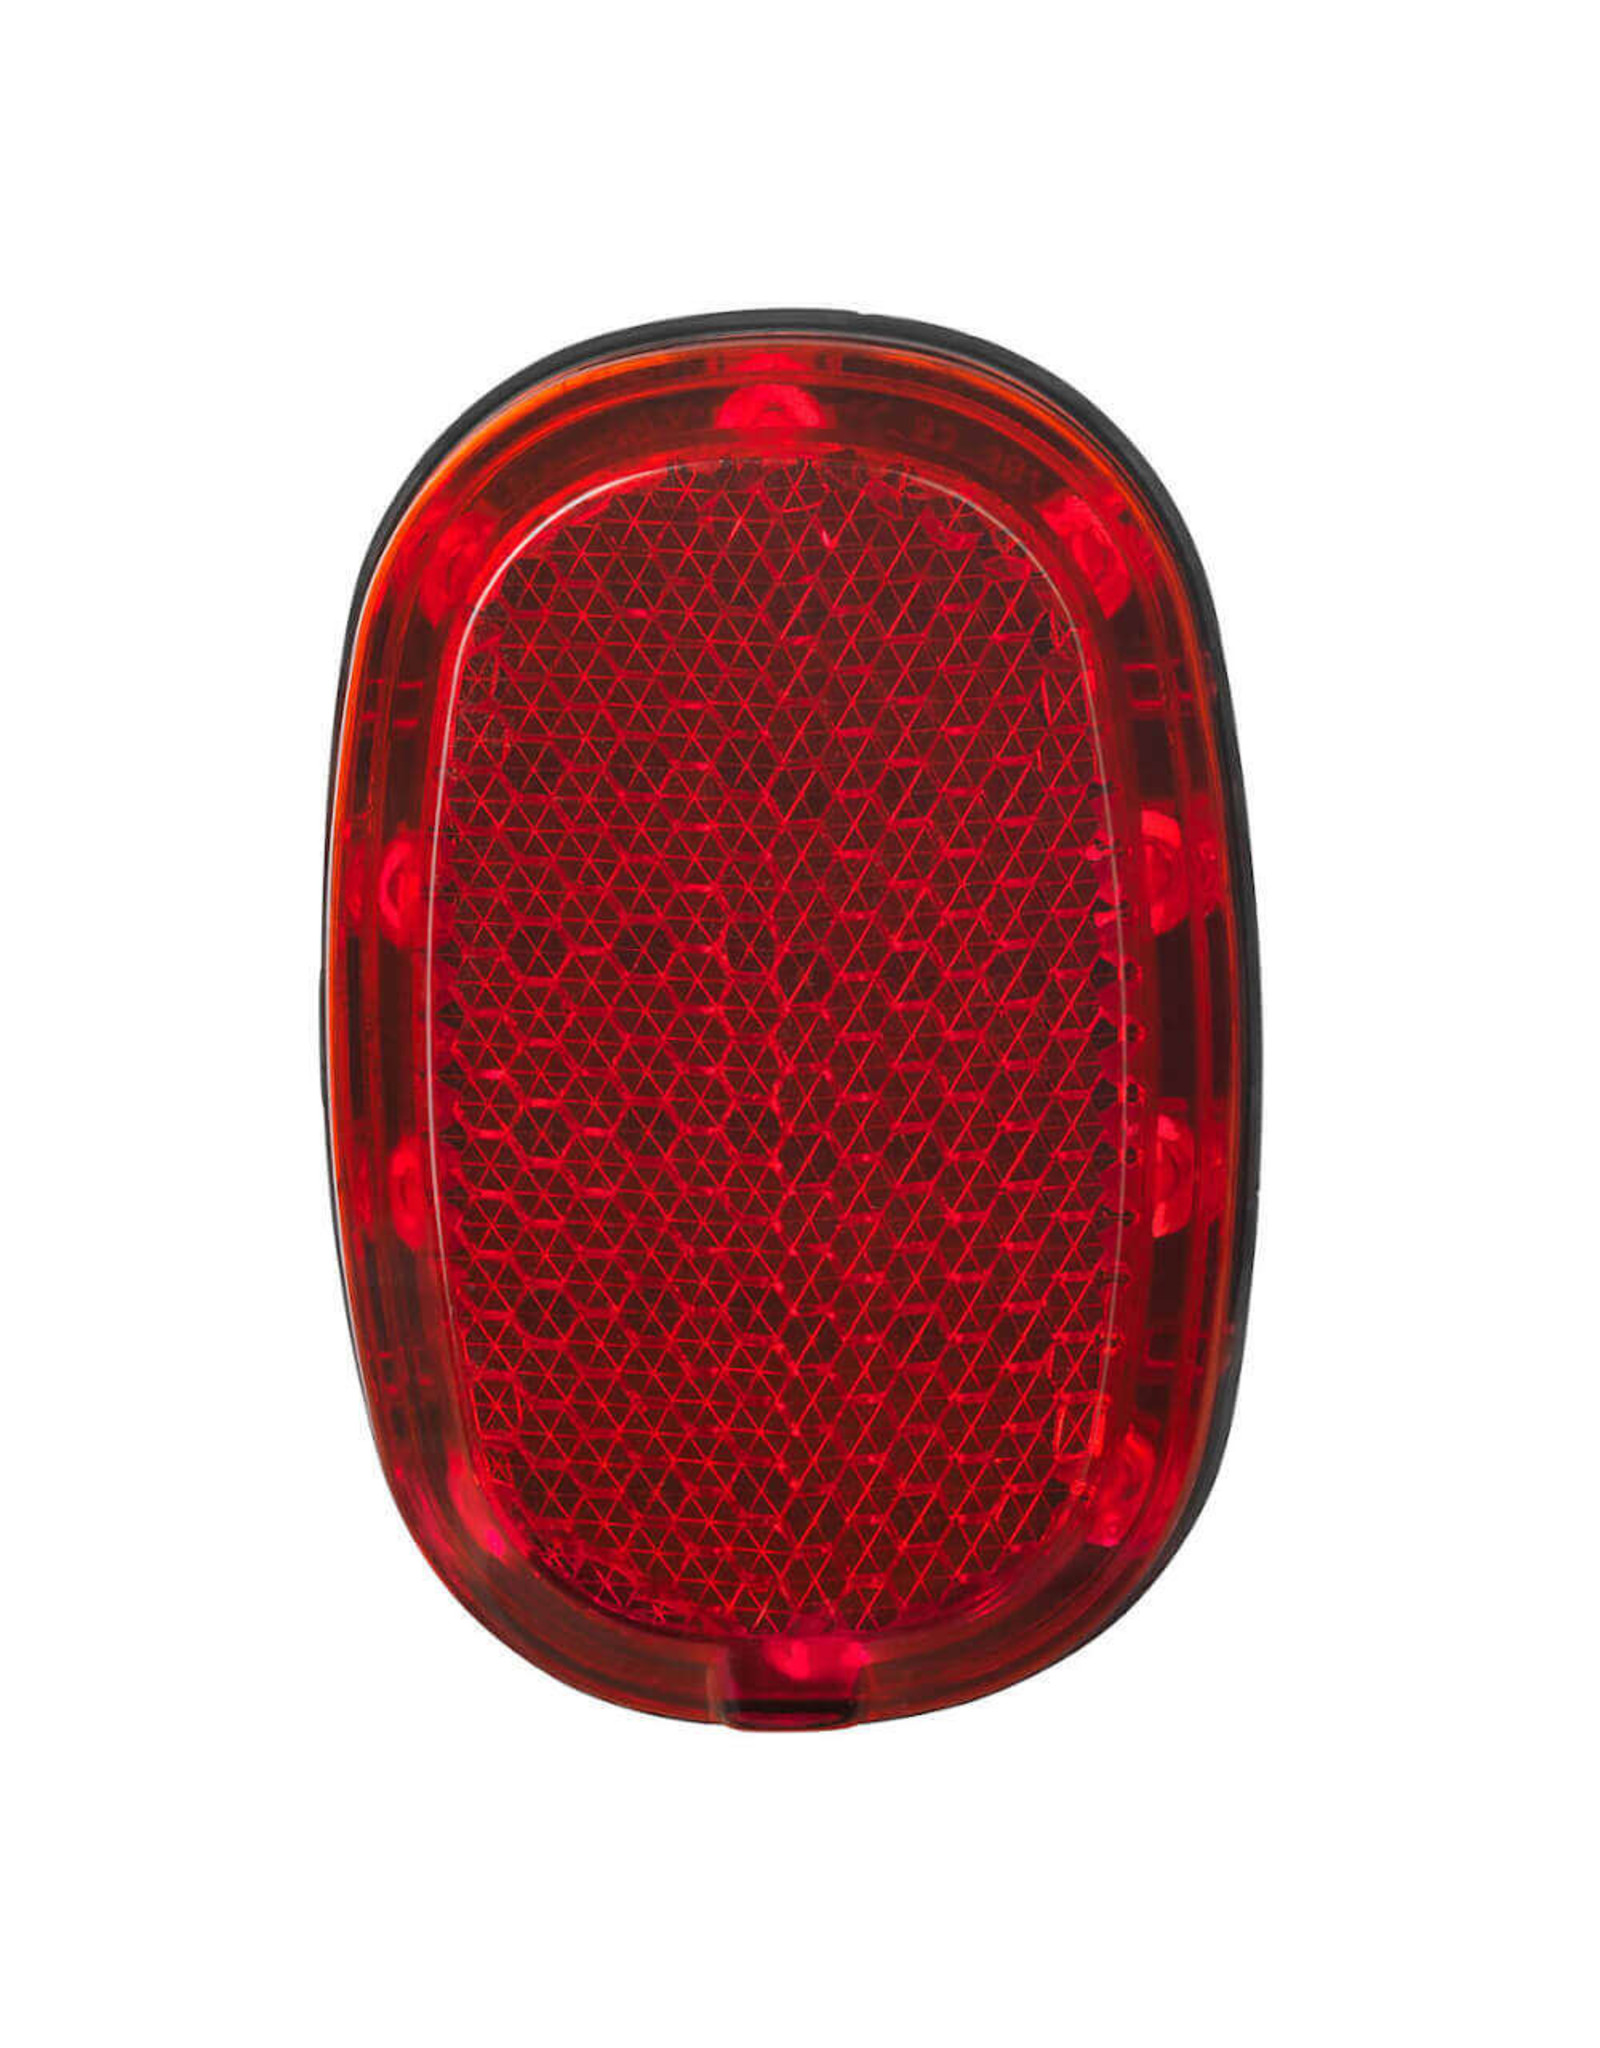 B&M Busch & Muller SecuZED Plus Taillight for Fender/Frame, Wire Included